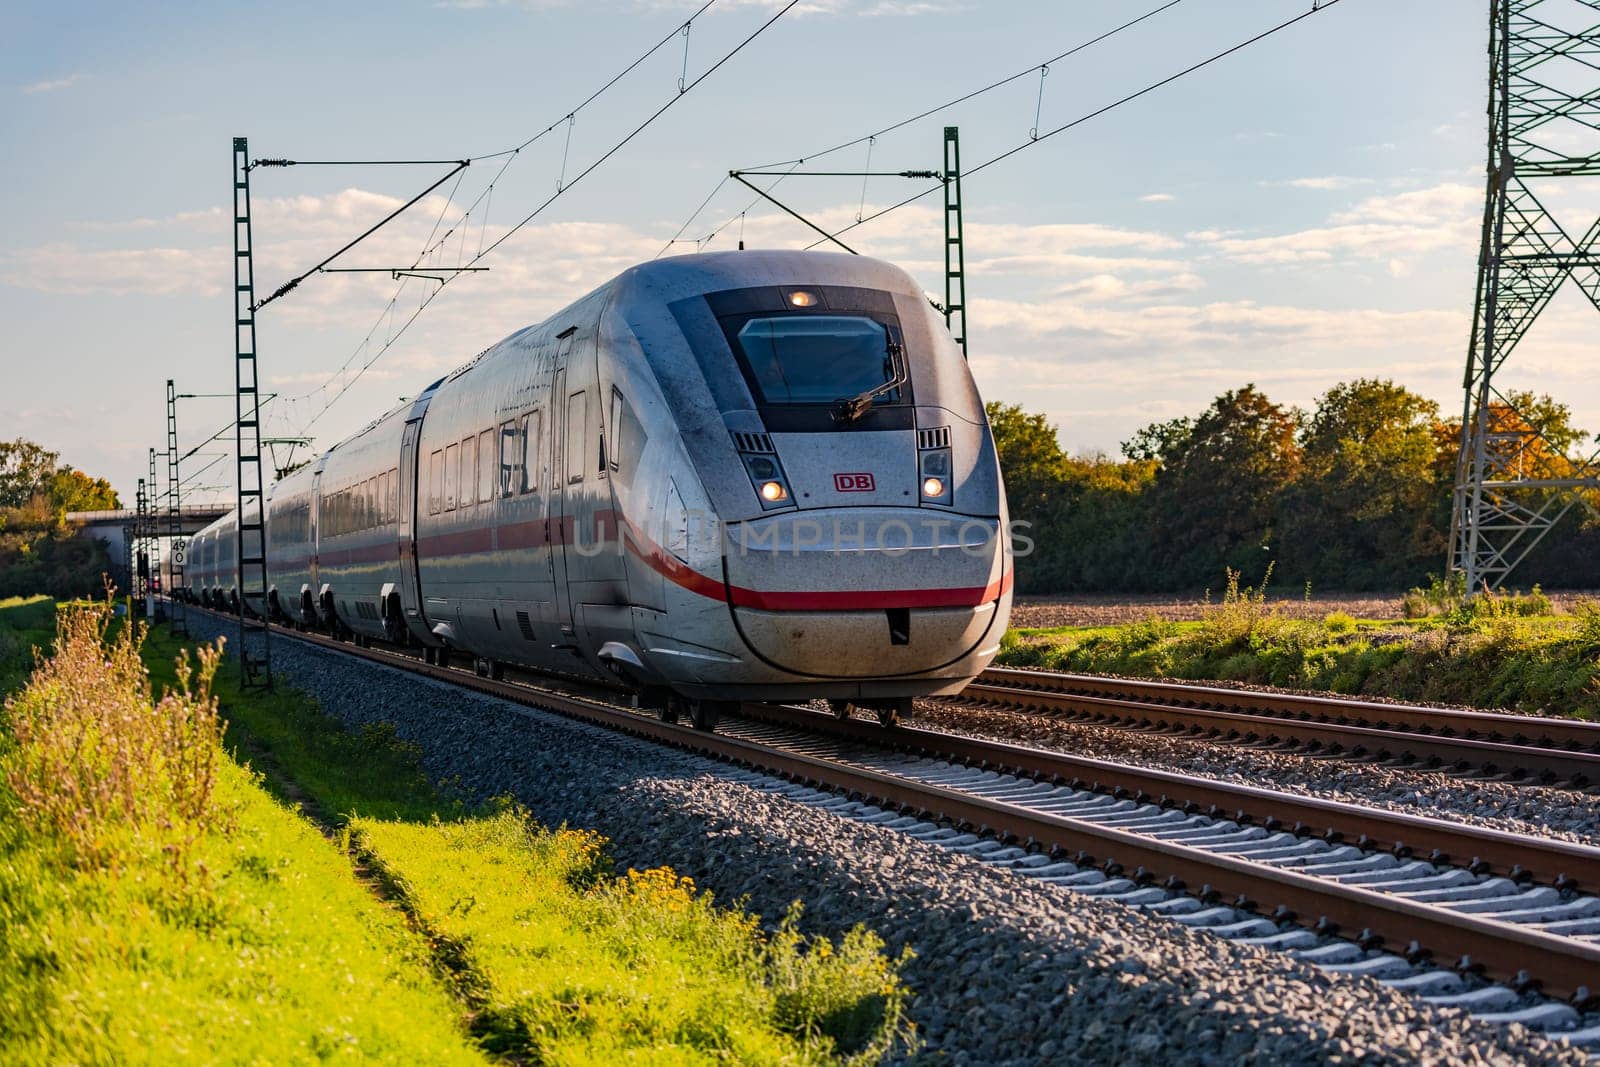 A fast ICE express train runs electrically for passenger transportation through a rural area in Germany